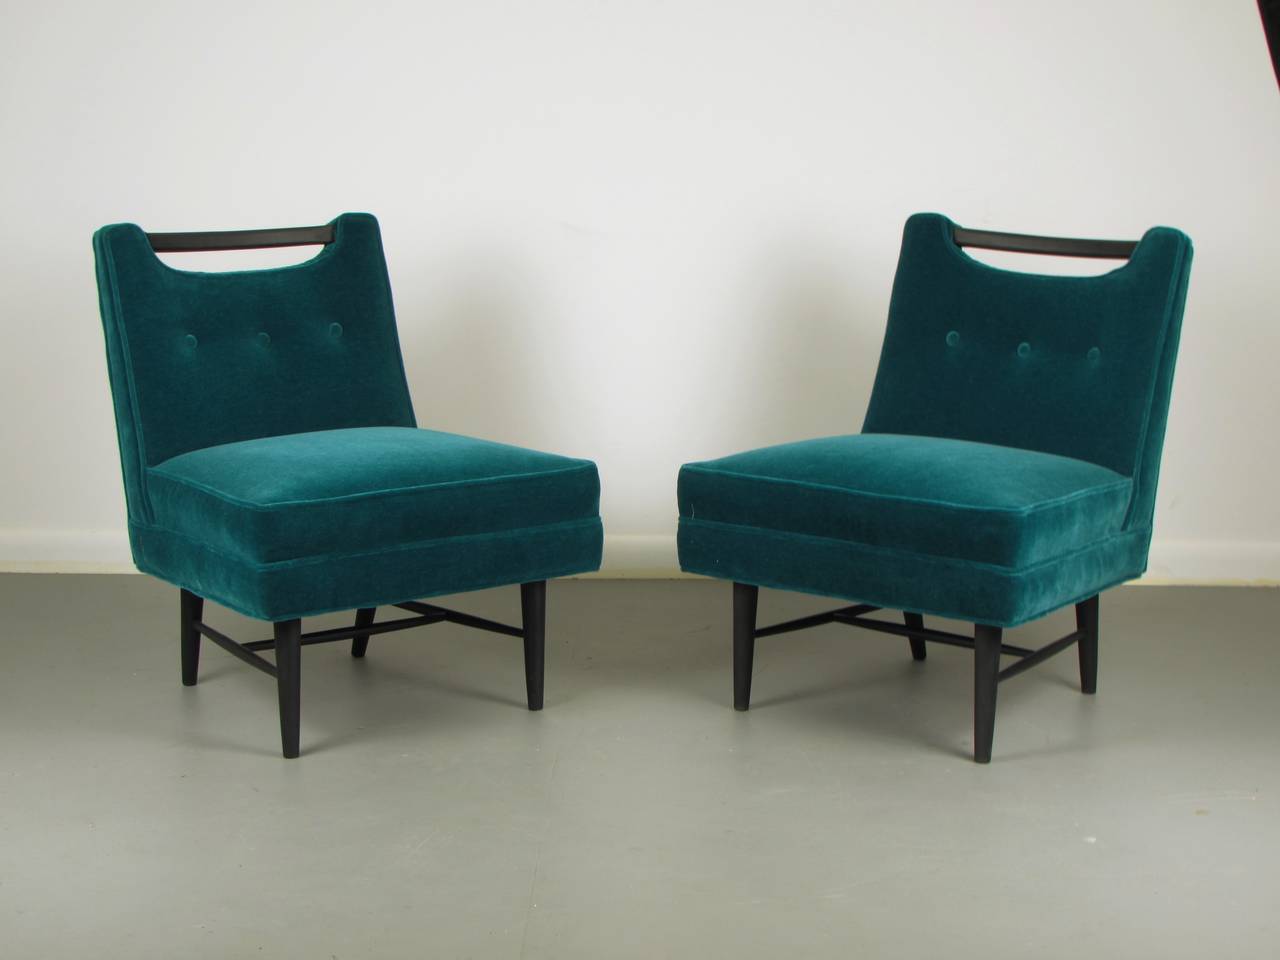 Pair of Sculptural Harvey Probber Style Slipper Chairs in Peacock Mohair. These chairs are absolutely gorgeous. The frames are in a matte ebonized finish. Excellent quality. Sturdy and heavy. 

We offer free regular deliveries to NYC and